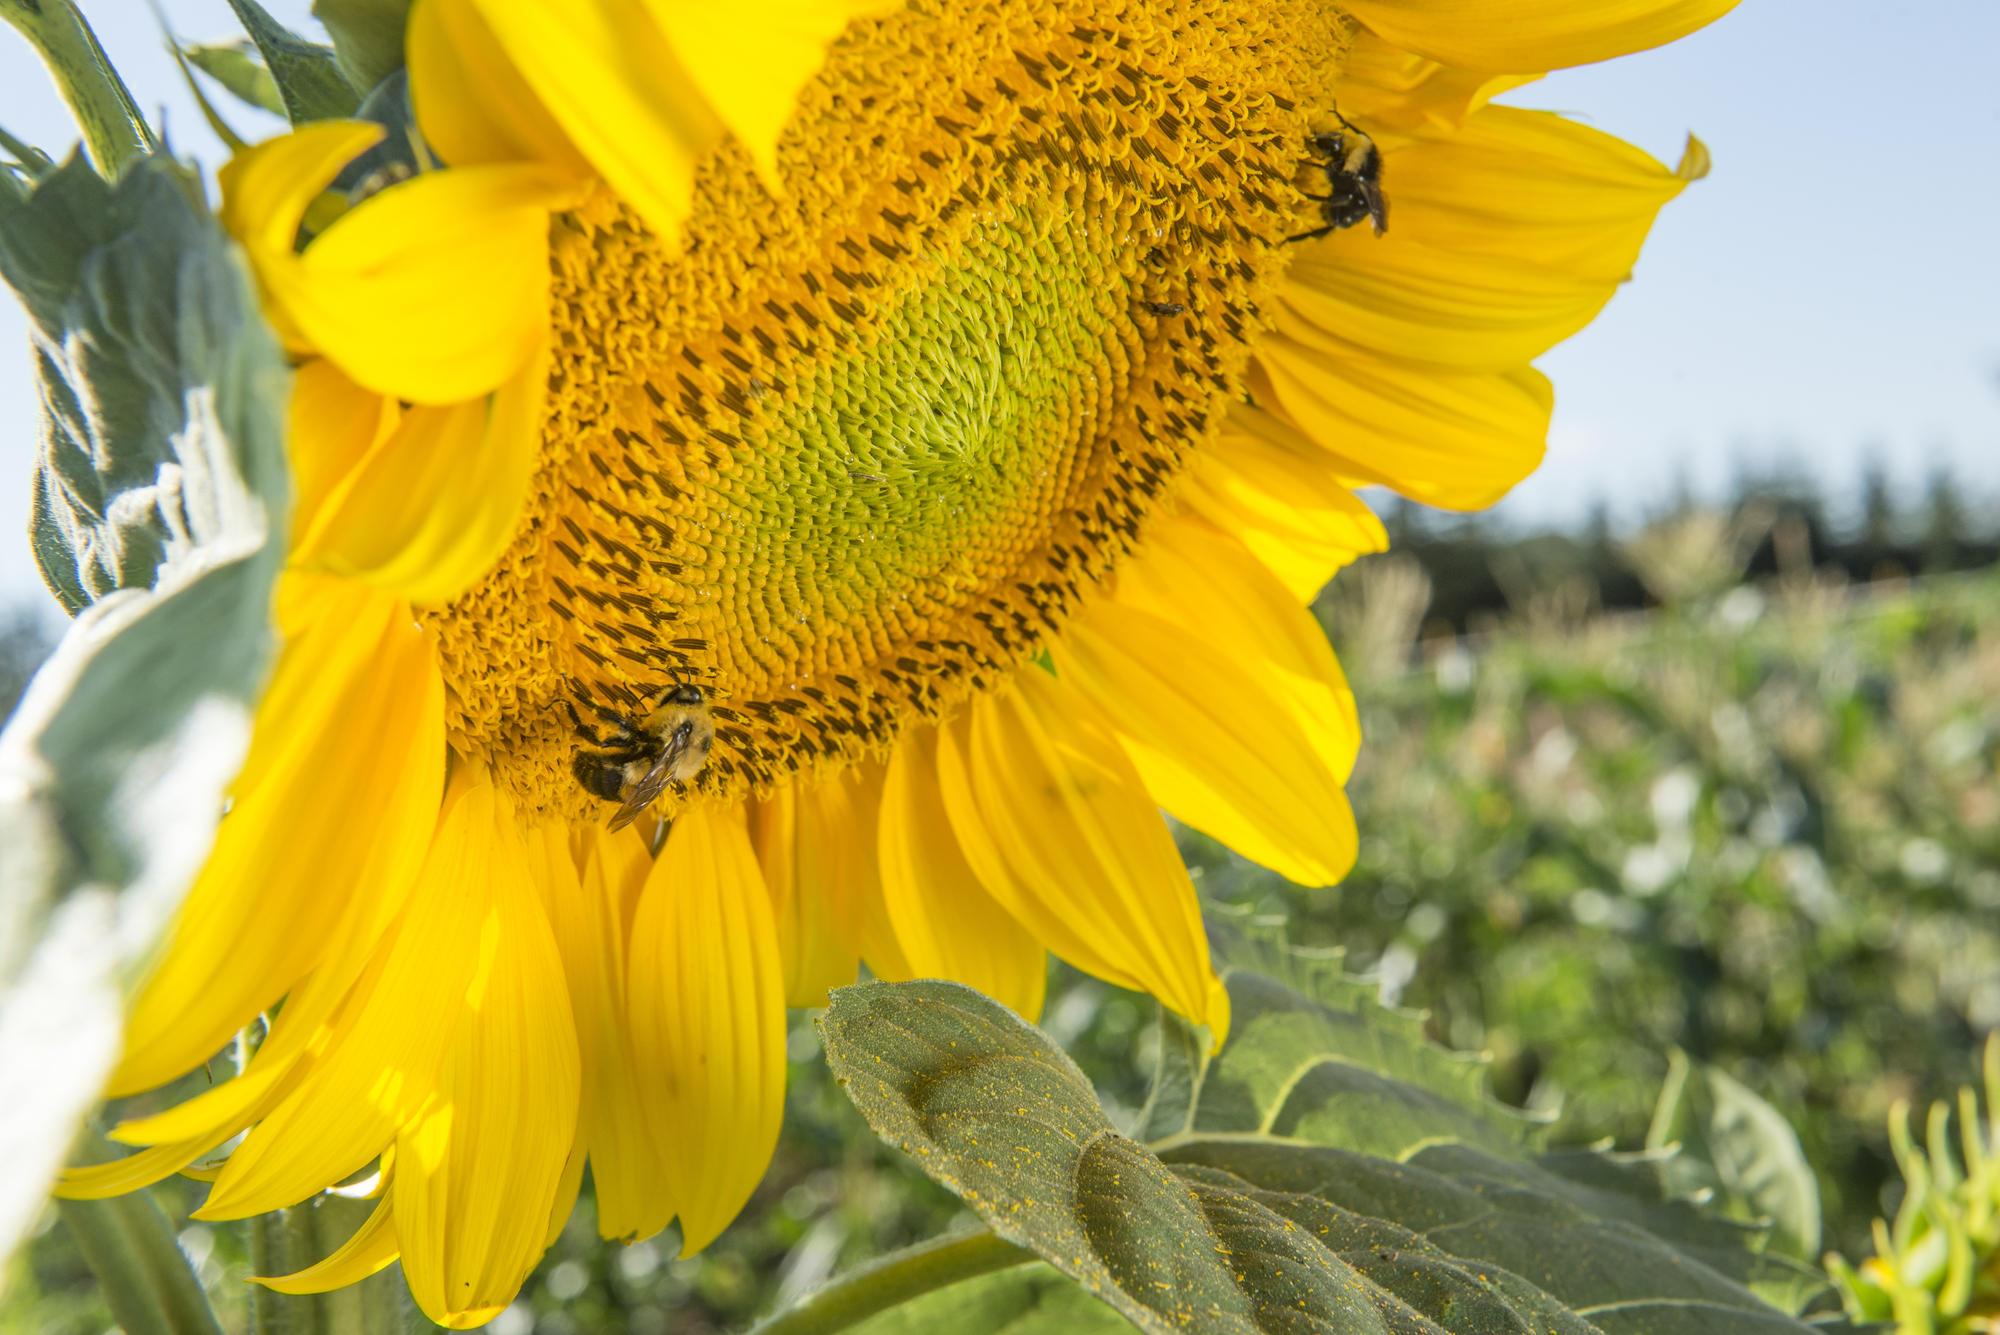 Bees gather pollen from big yellow sunflower